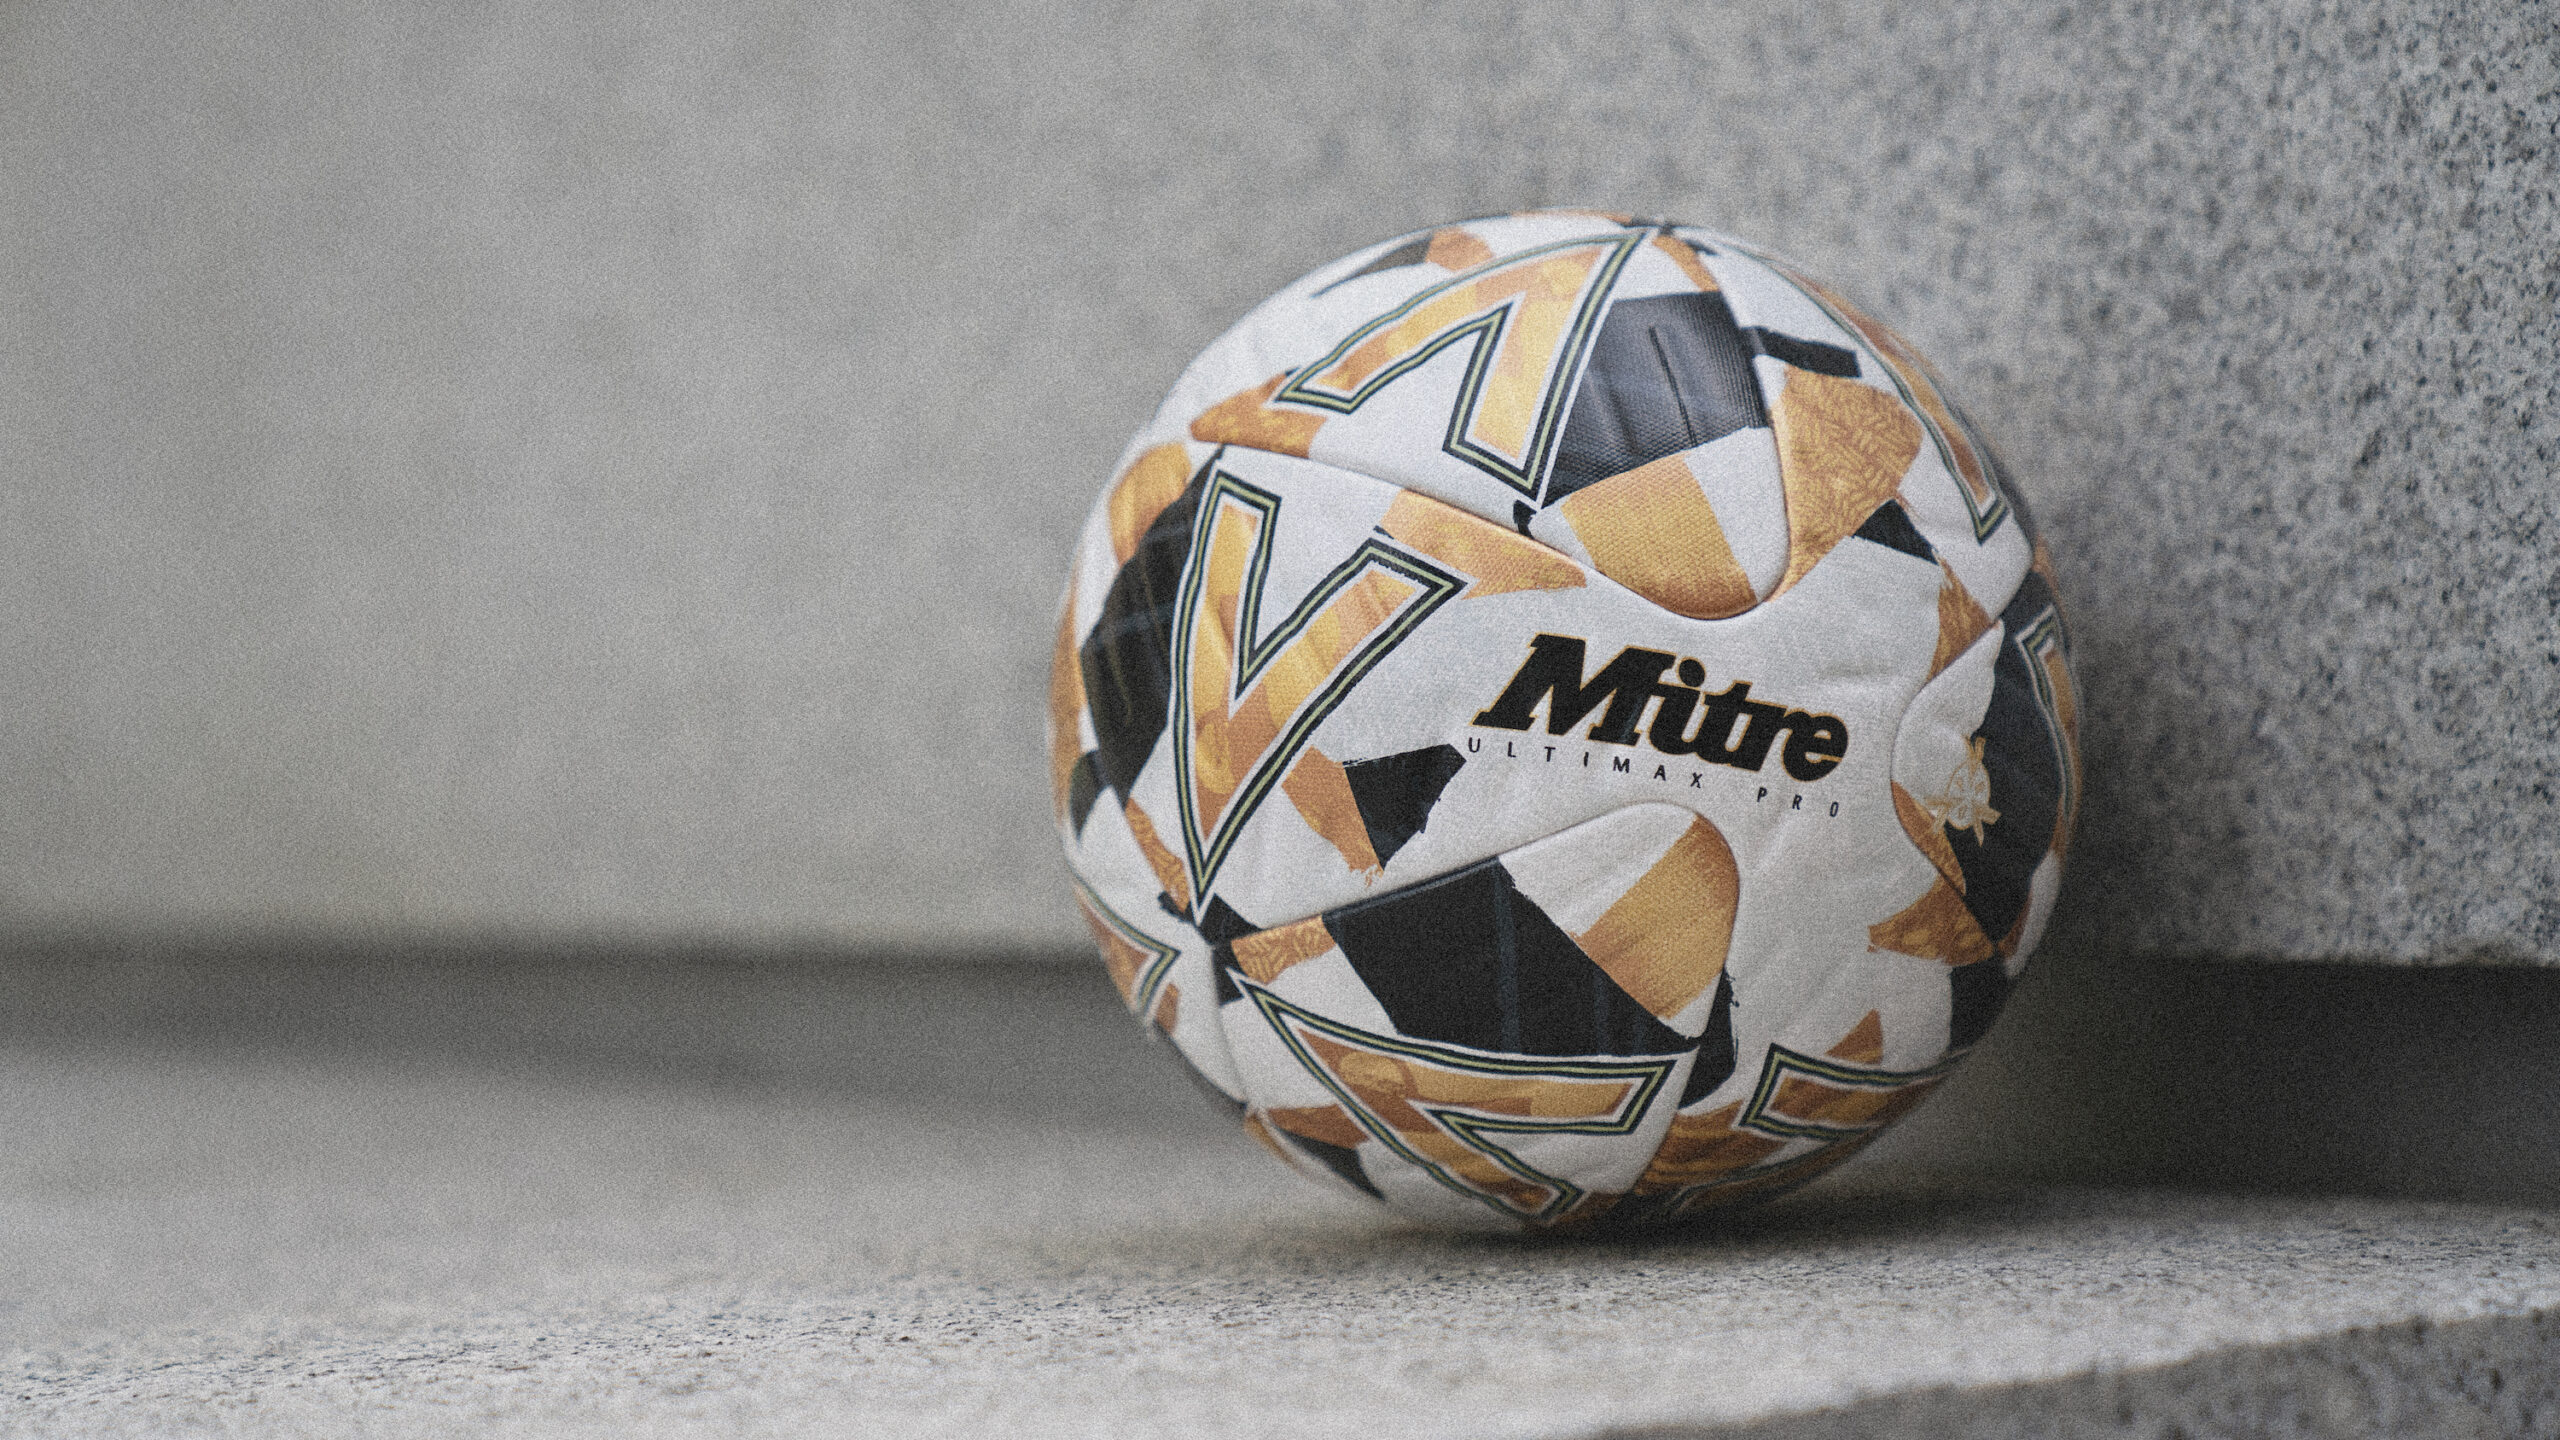 Mitre becomes official ball sponsor for high-stakes soccer tournament